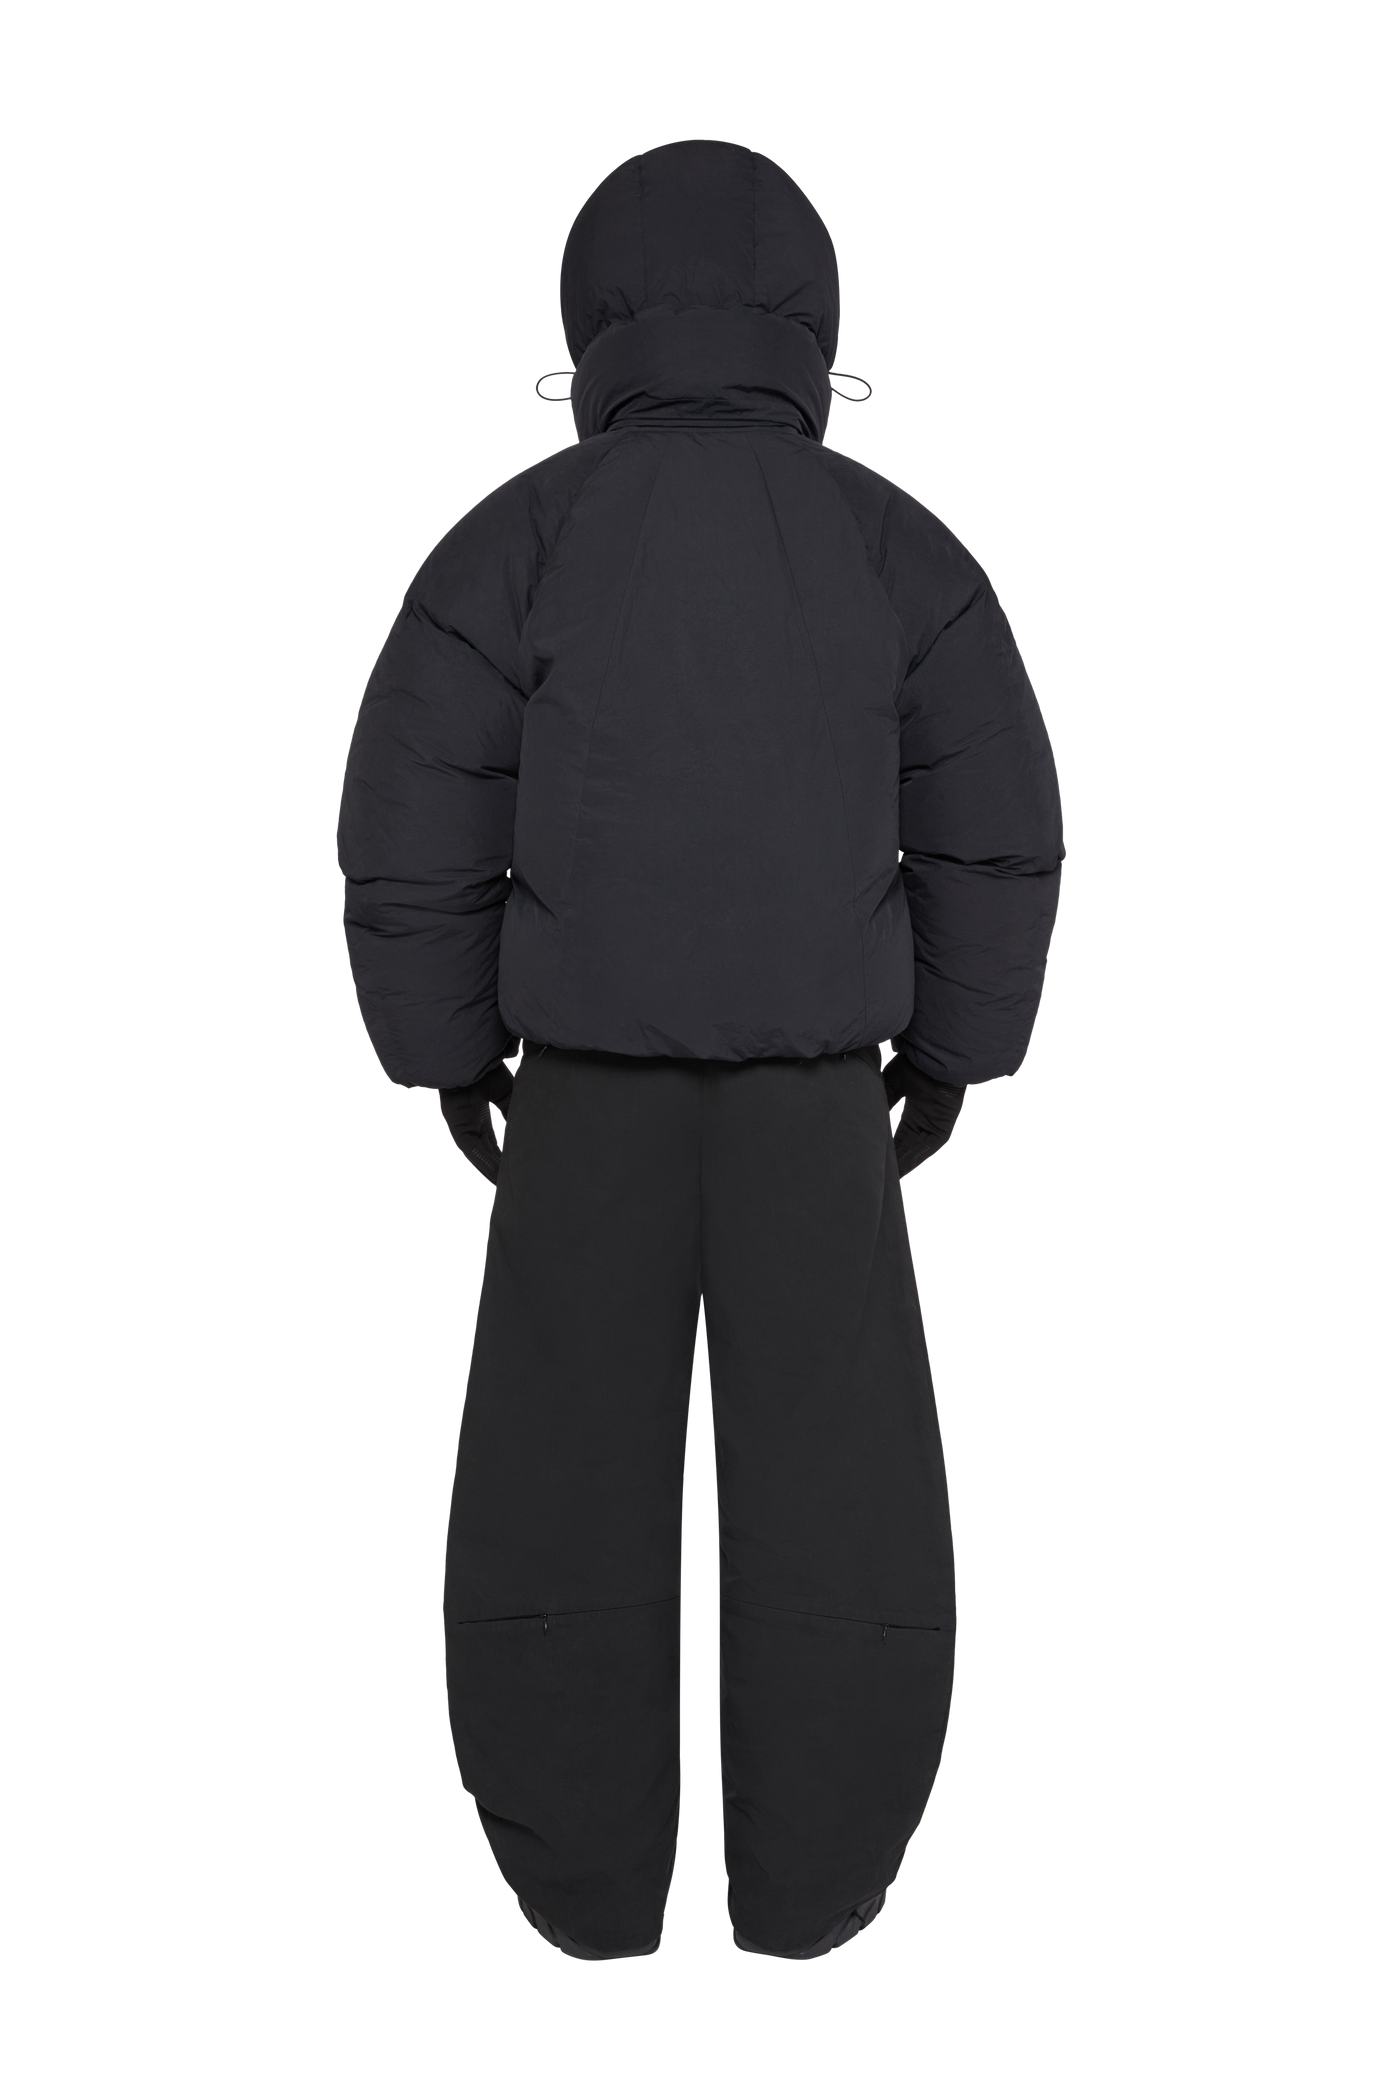 Mens Black Duck Down Insulated Coat